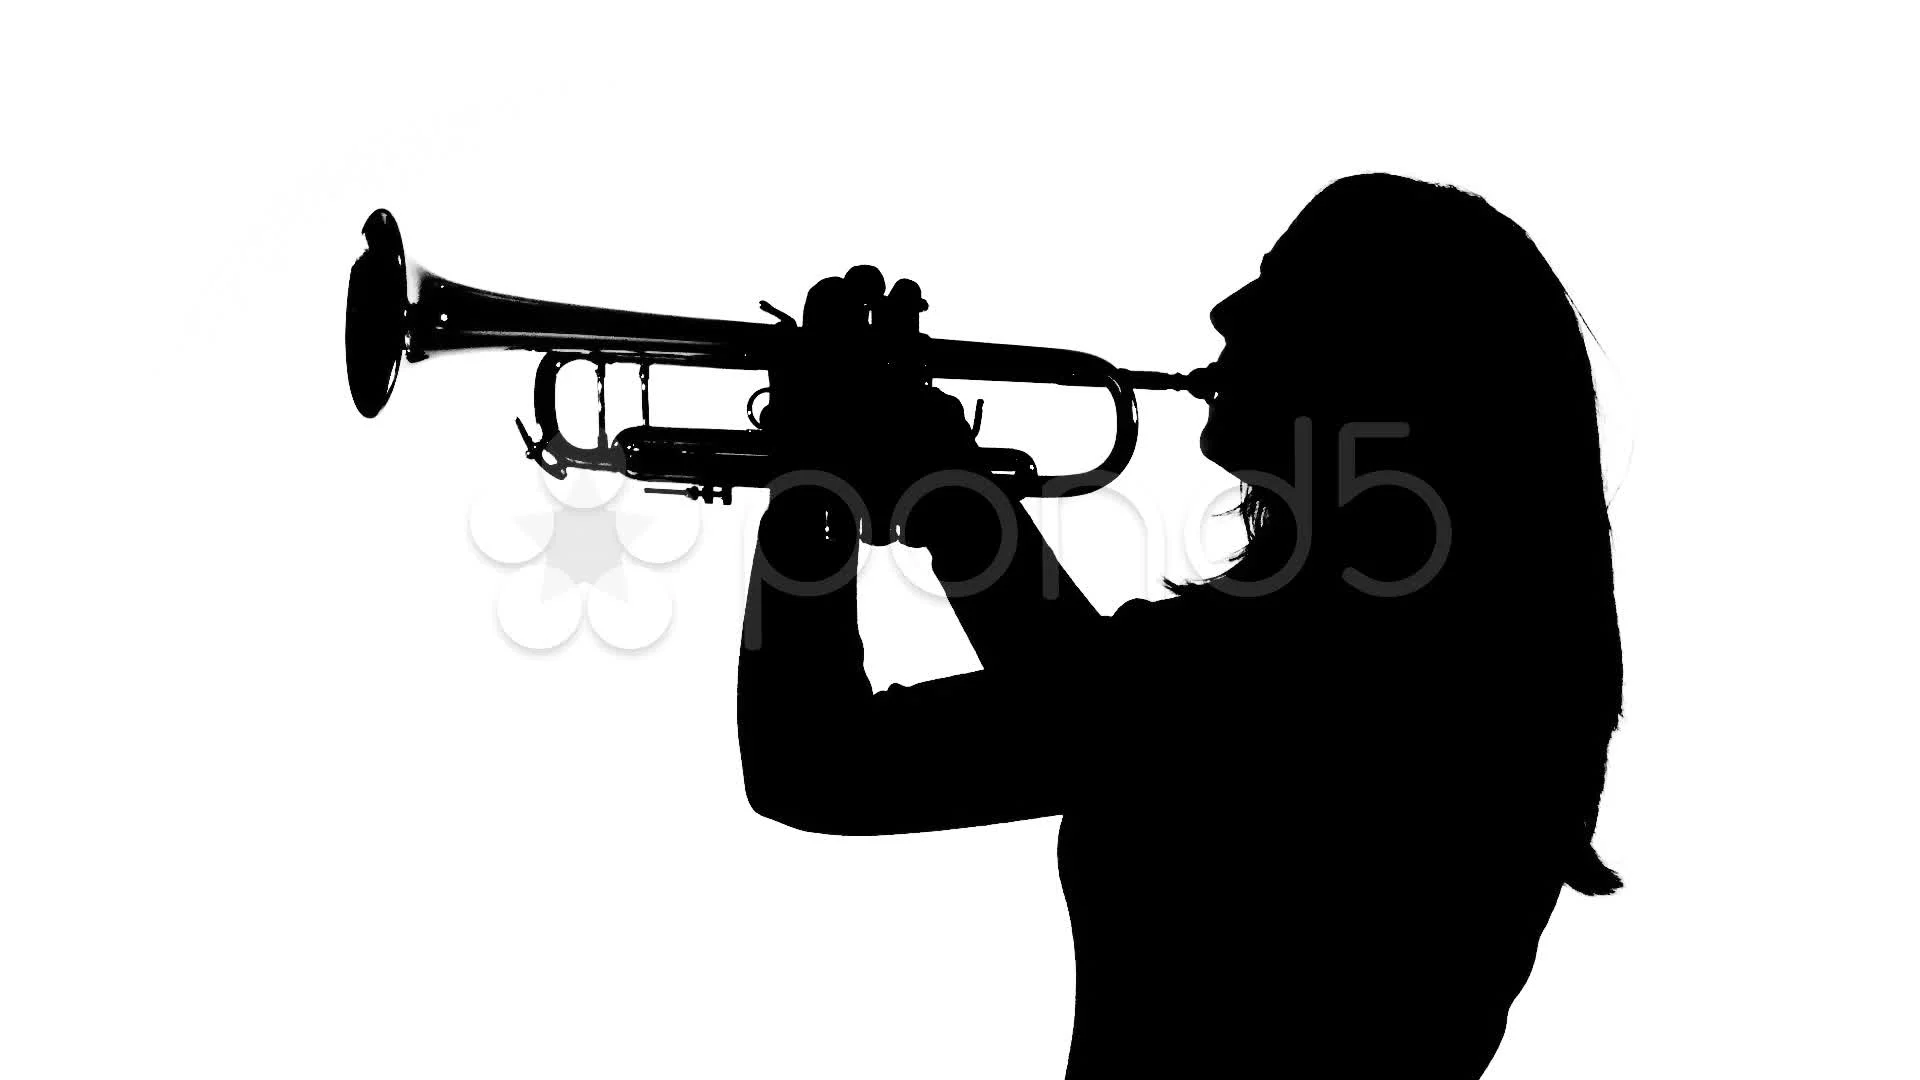 Trumpet Girl Silhouette MS, Stock Video